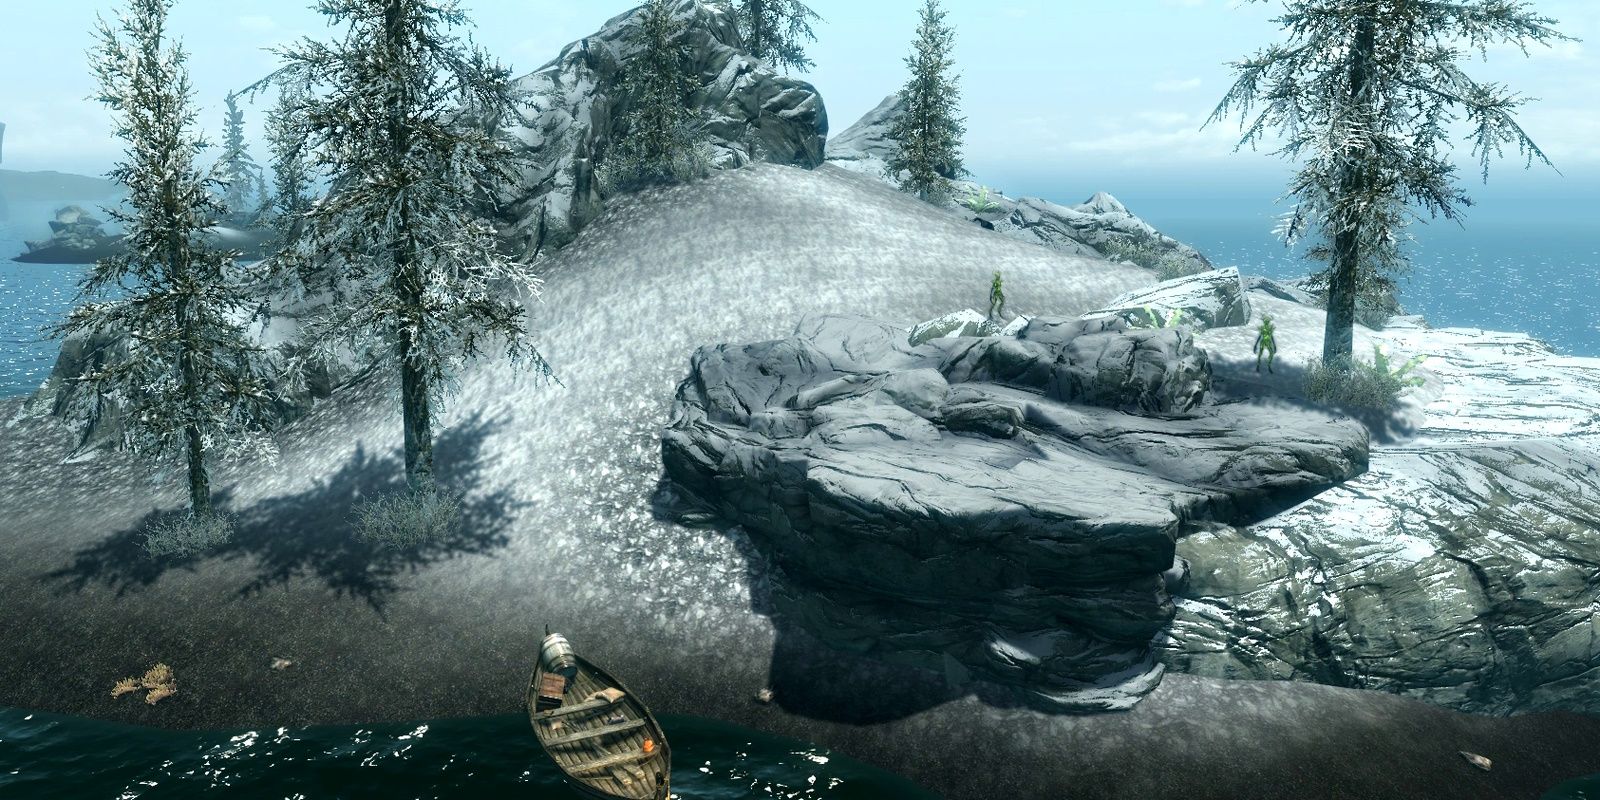 A snowy island with tall trees in Skyrim, at the bottom a rowboat sits empty.